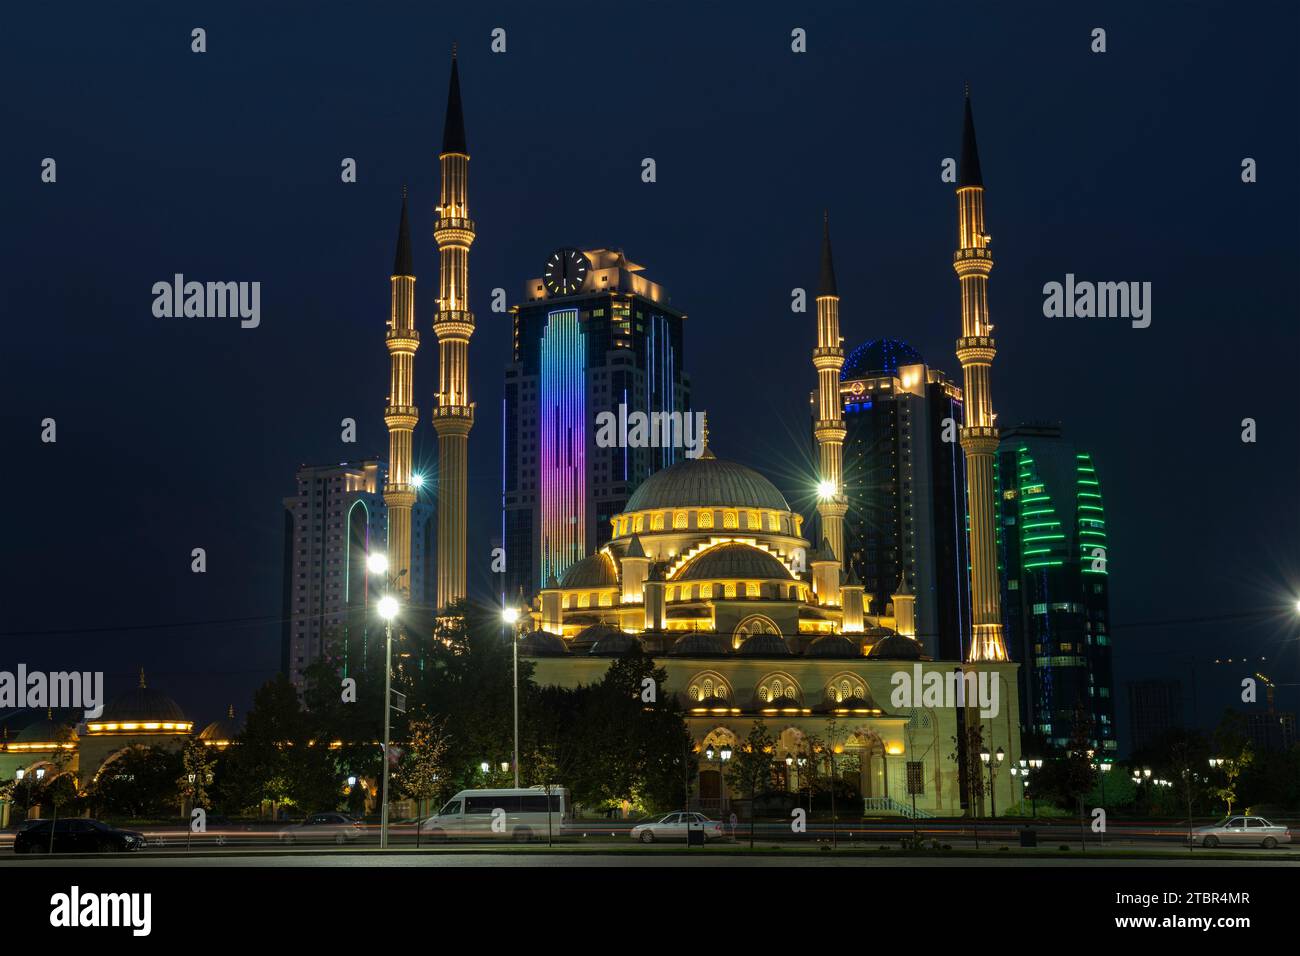 GROZNY, RUSSIA - SEPTEMBER 29, 2021: The Heart of Chechnya Mosque against the background of the Grozny City complex on September night Stock Photo